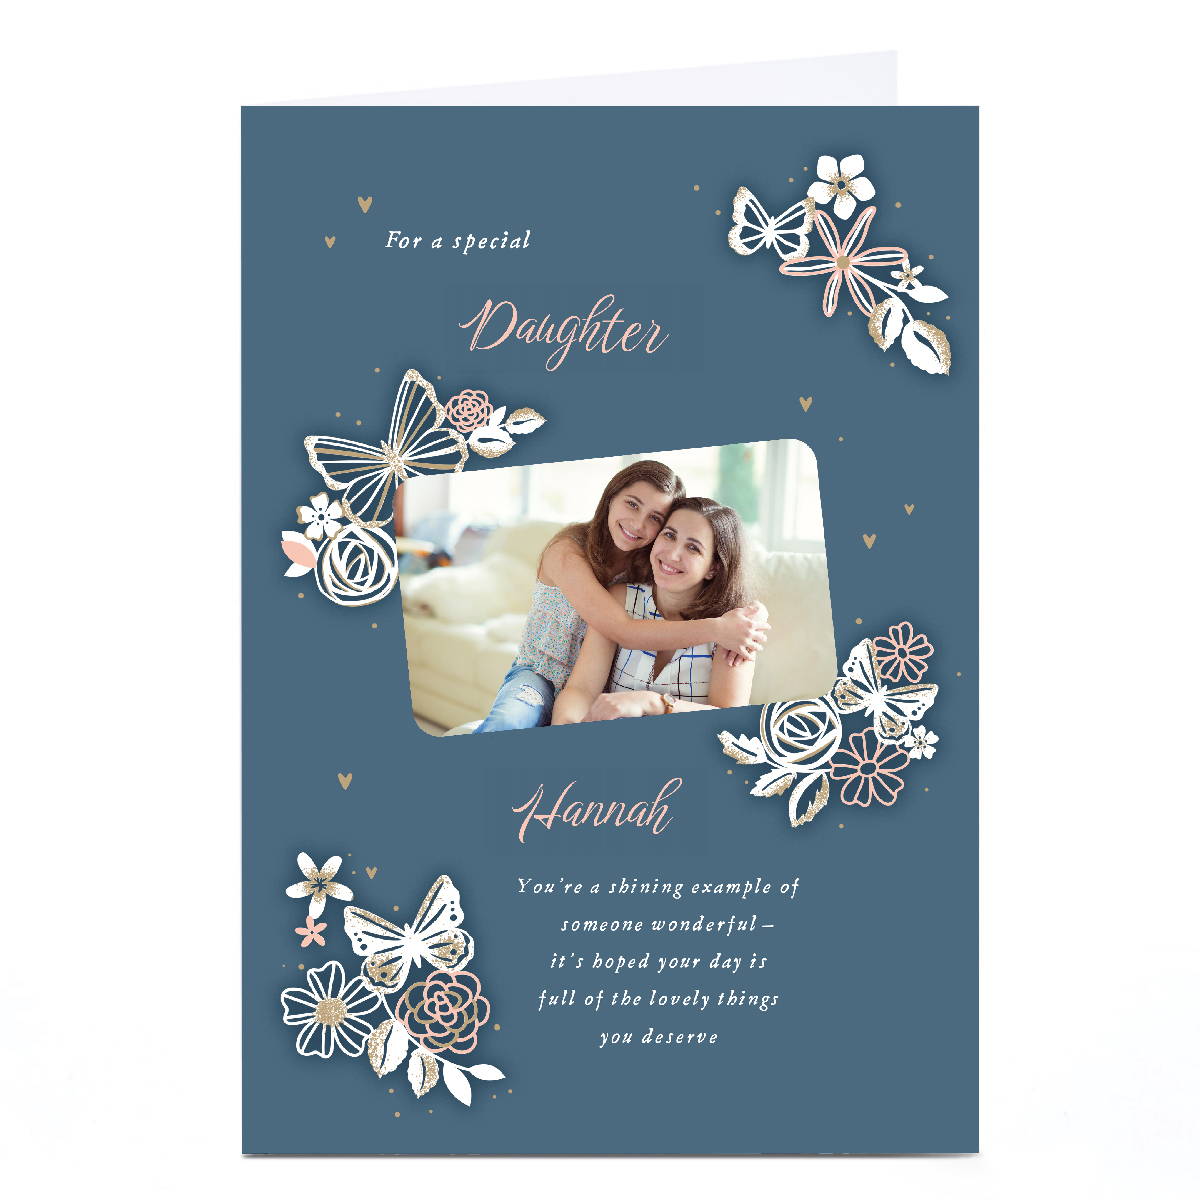 Personalised Birthday Card - For a special Daughter